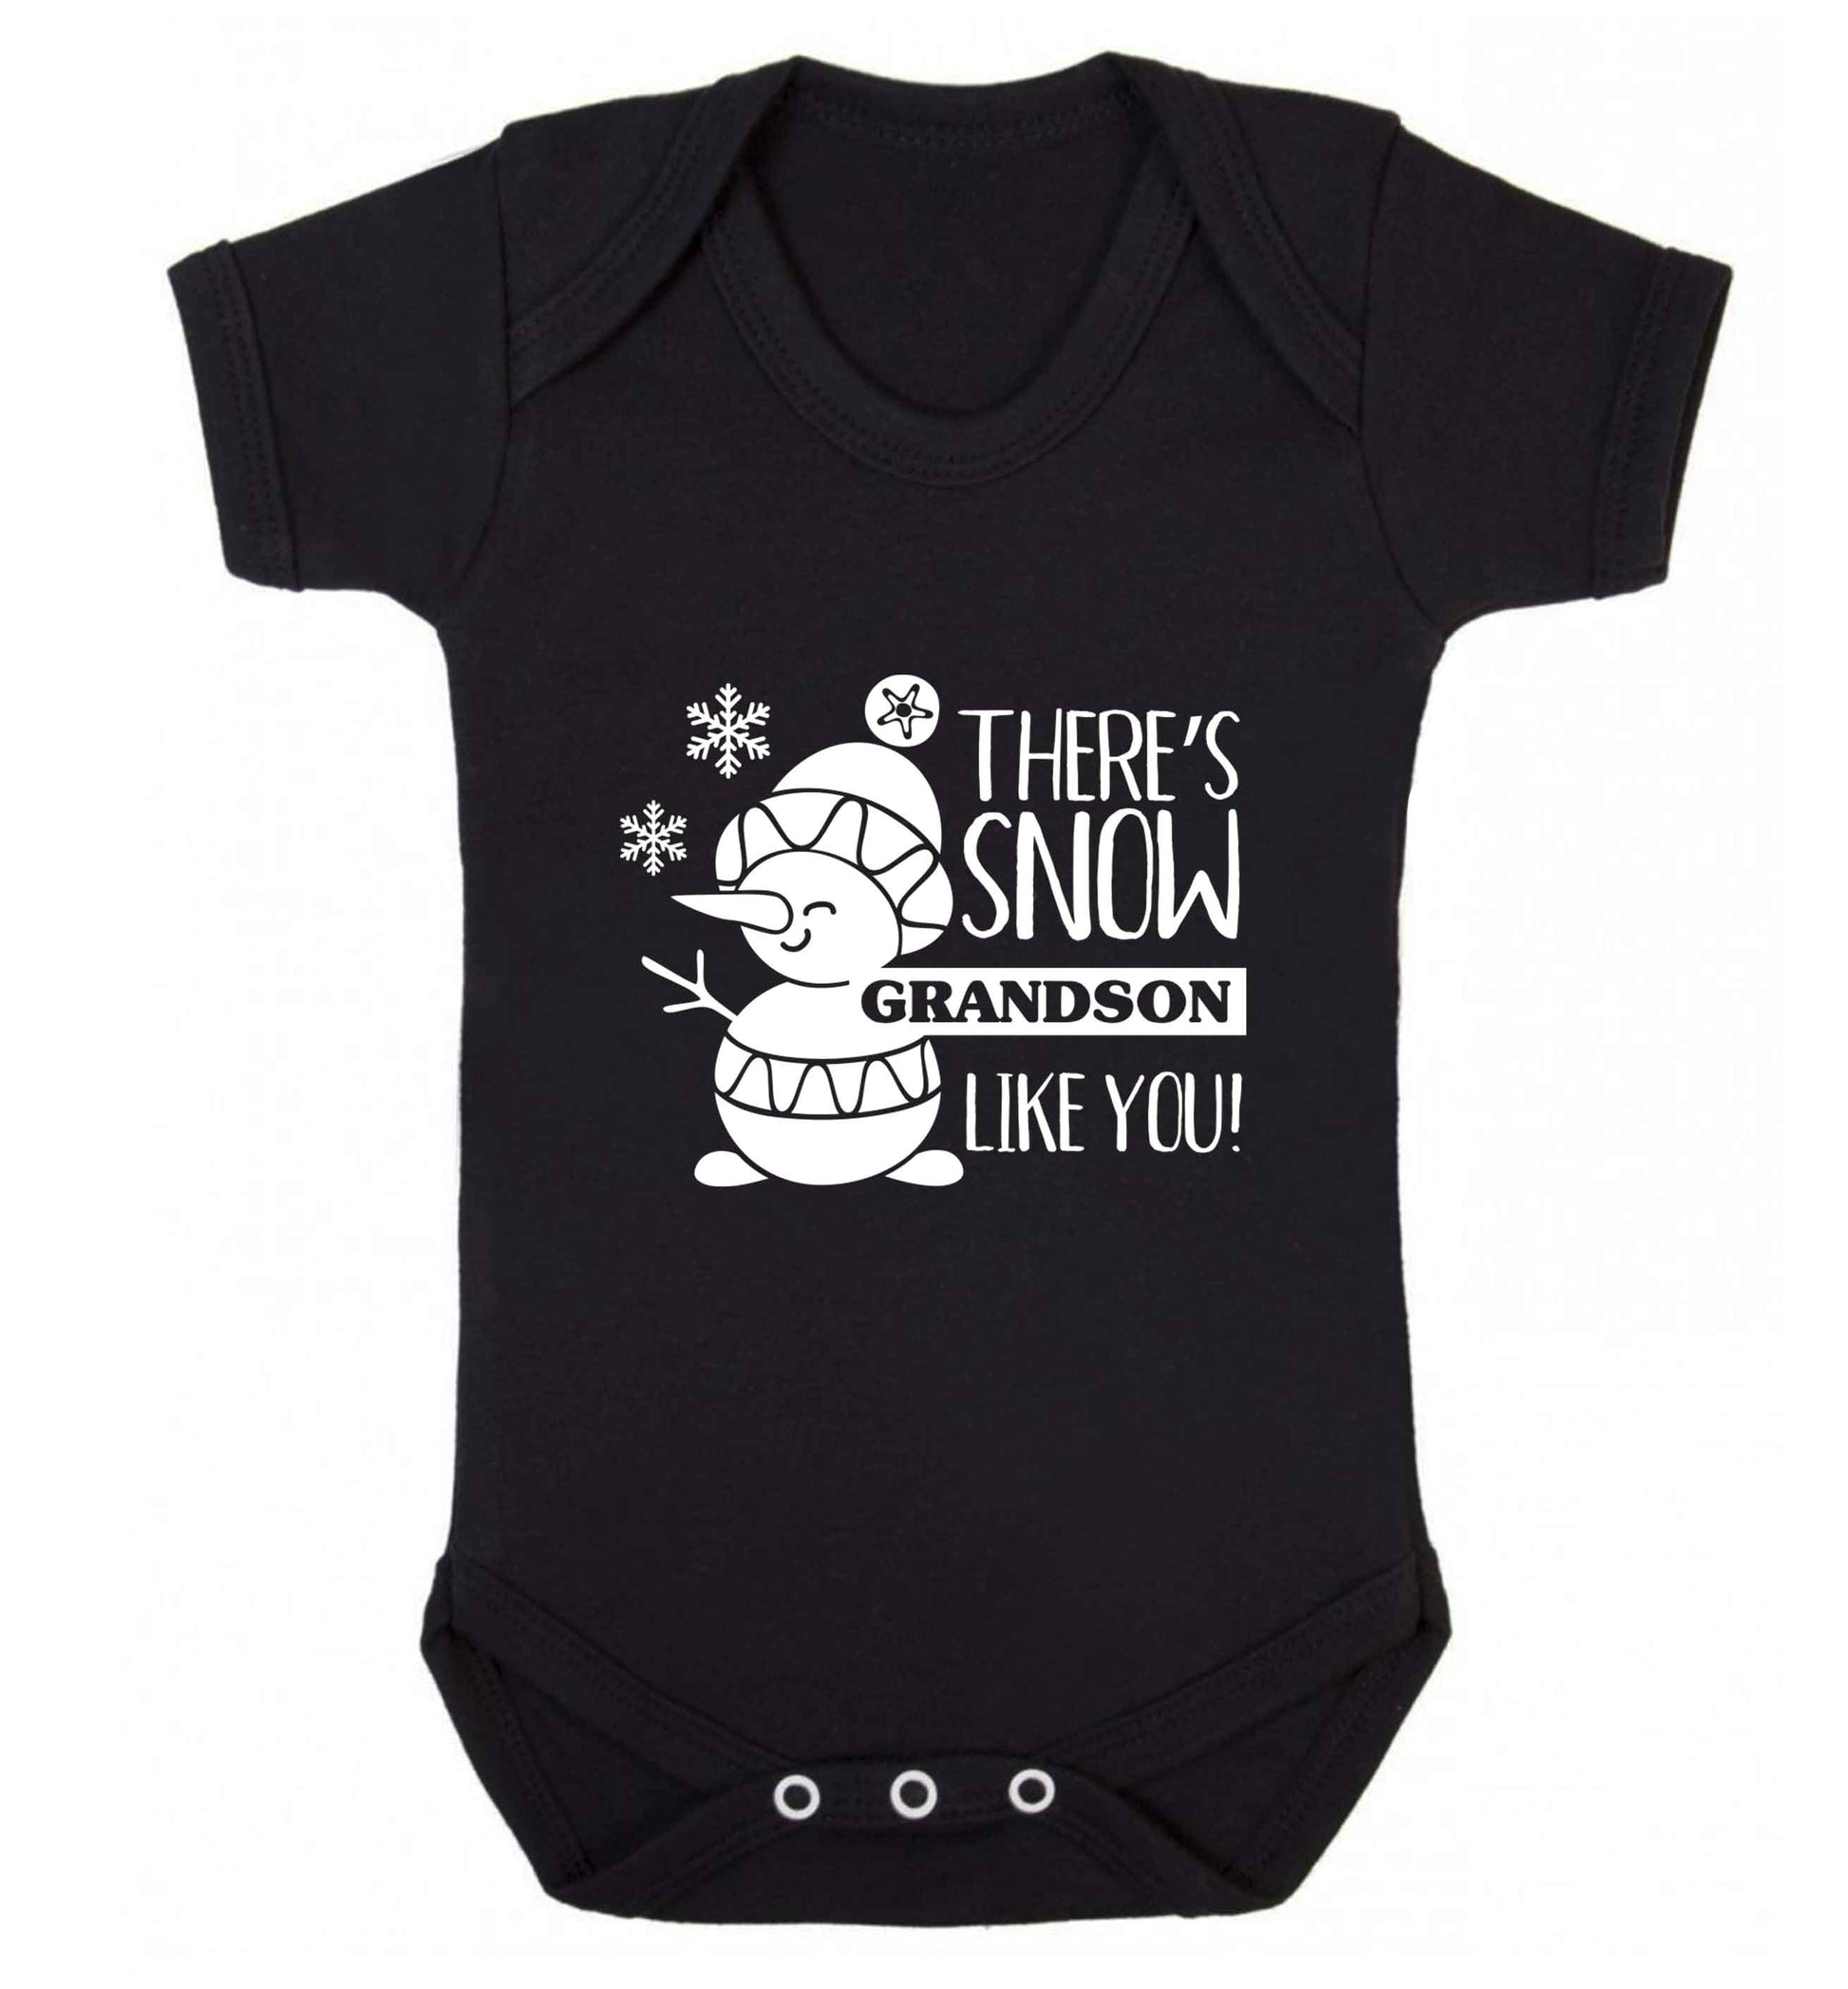 There's snow grandson like you baby vest black 18-24 months